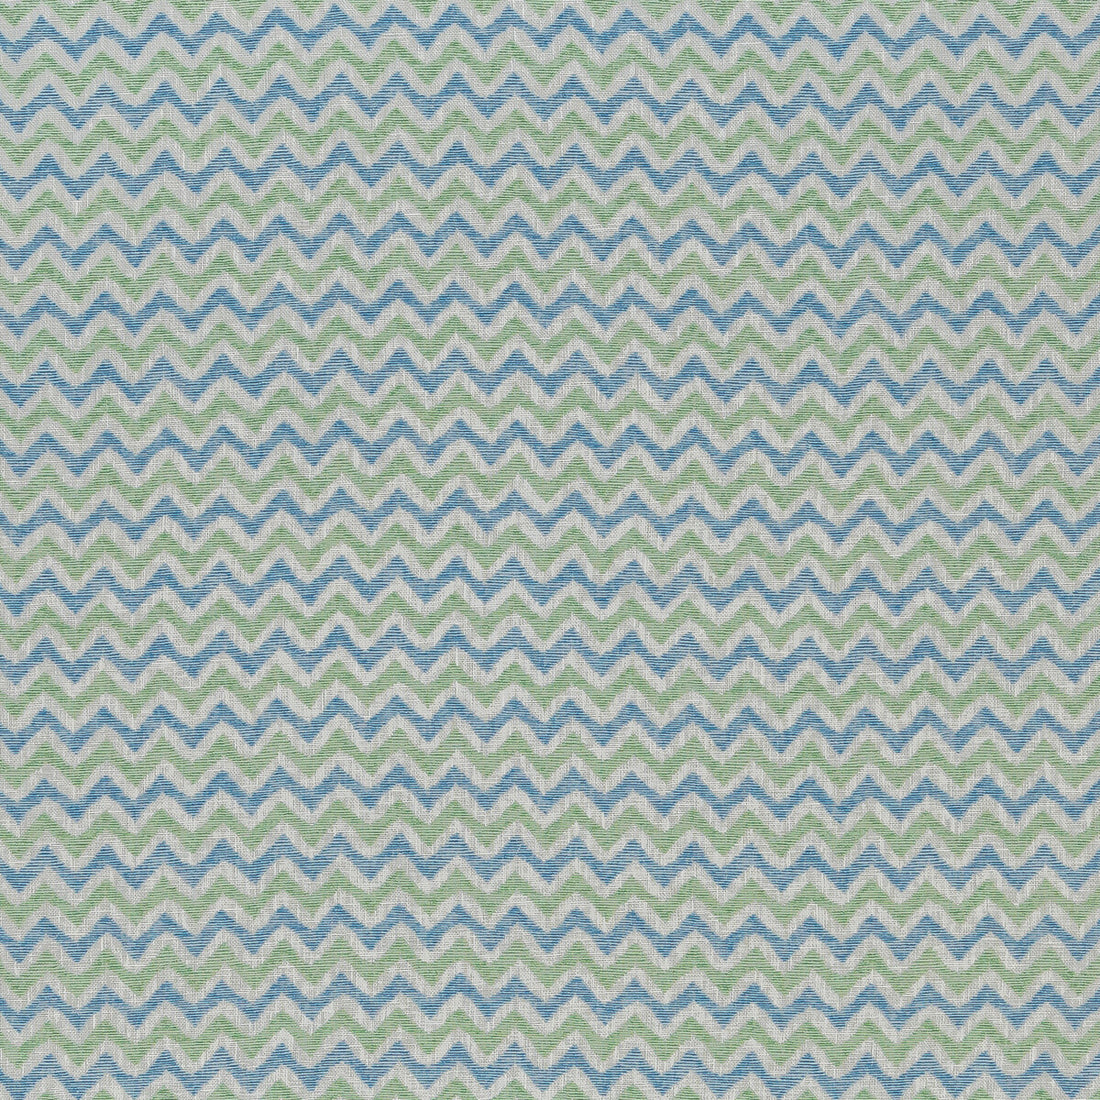 Baby Colebrook fabric in blue/green color - pattern BFC-3698.523.0 - by Lee Jofa in the Blithfield collection